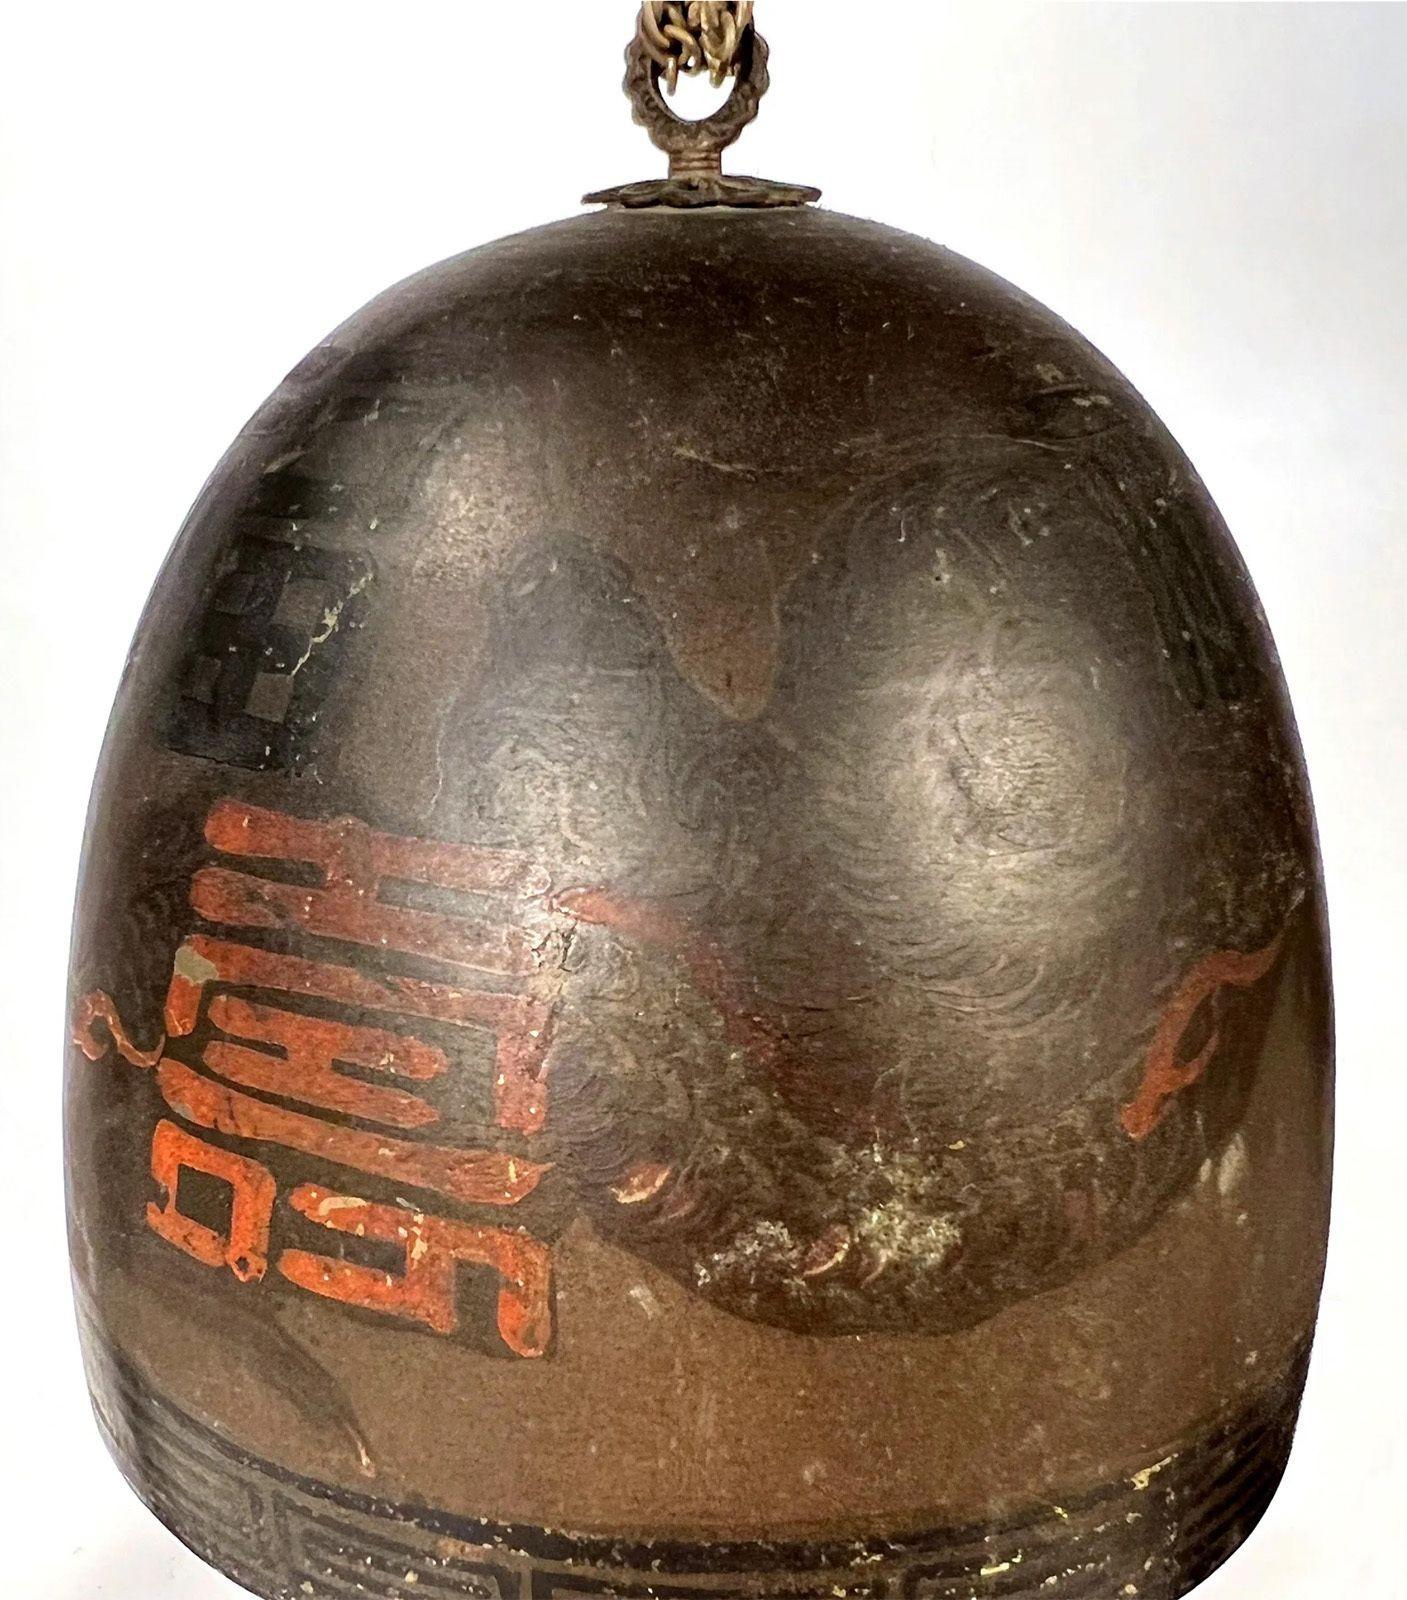 An early 20th century Japanese temple gong suspended in a metal pagoda style arch with calligraphy on the bell and frame at top. Dragon across the arch and figure on base.
Dimensions: 13